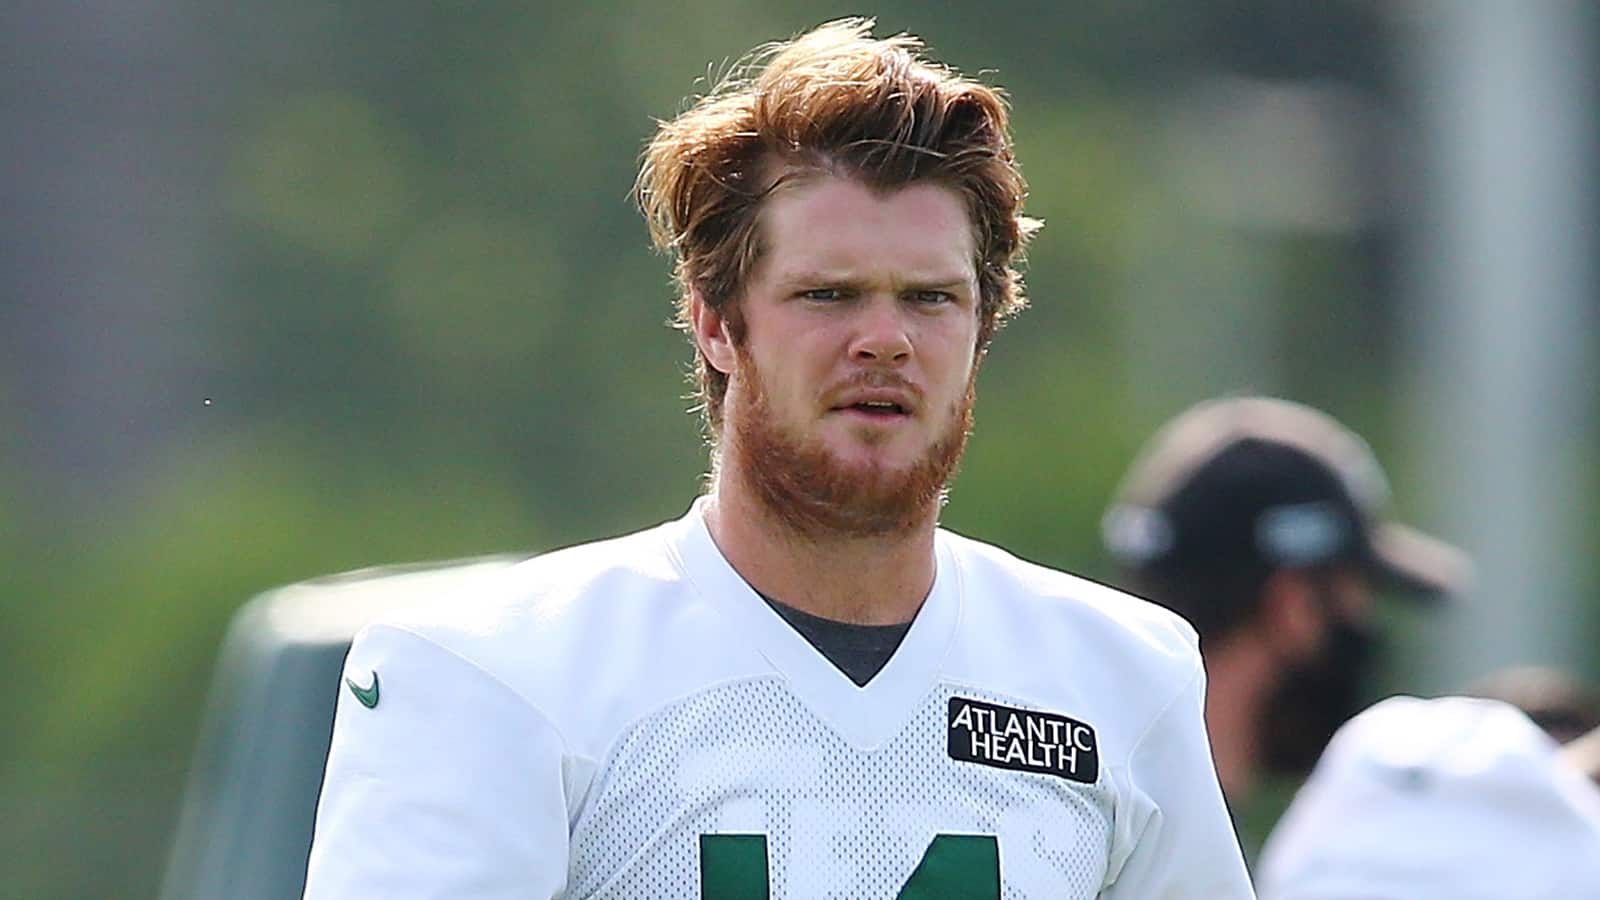 FLORHAM PARK, NEW JERSEY - AUGUST 14: Sam Darnold #14 of the New York Jets runs drills at Atlantic Health Jets Training Center on August 14, 2020 in Florham Park, New Jersey.